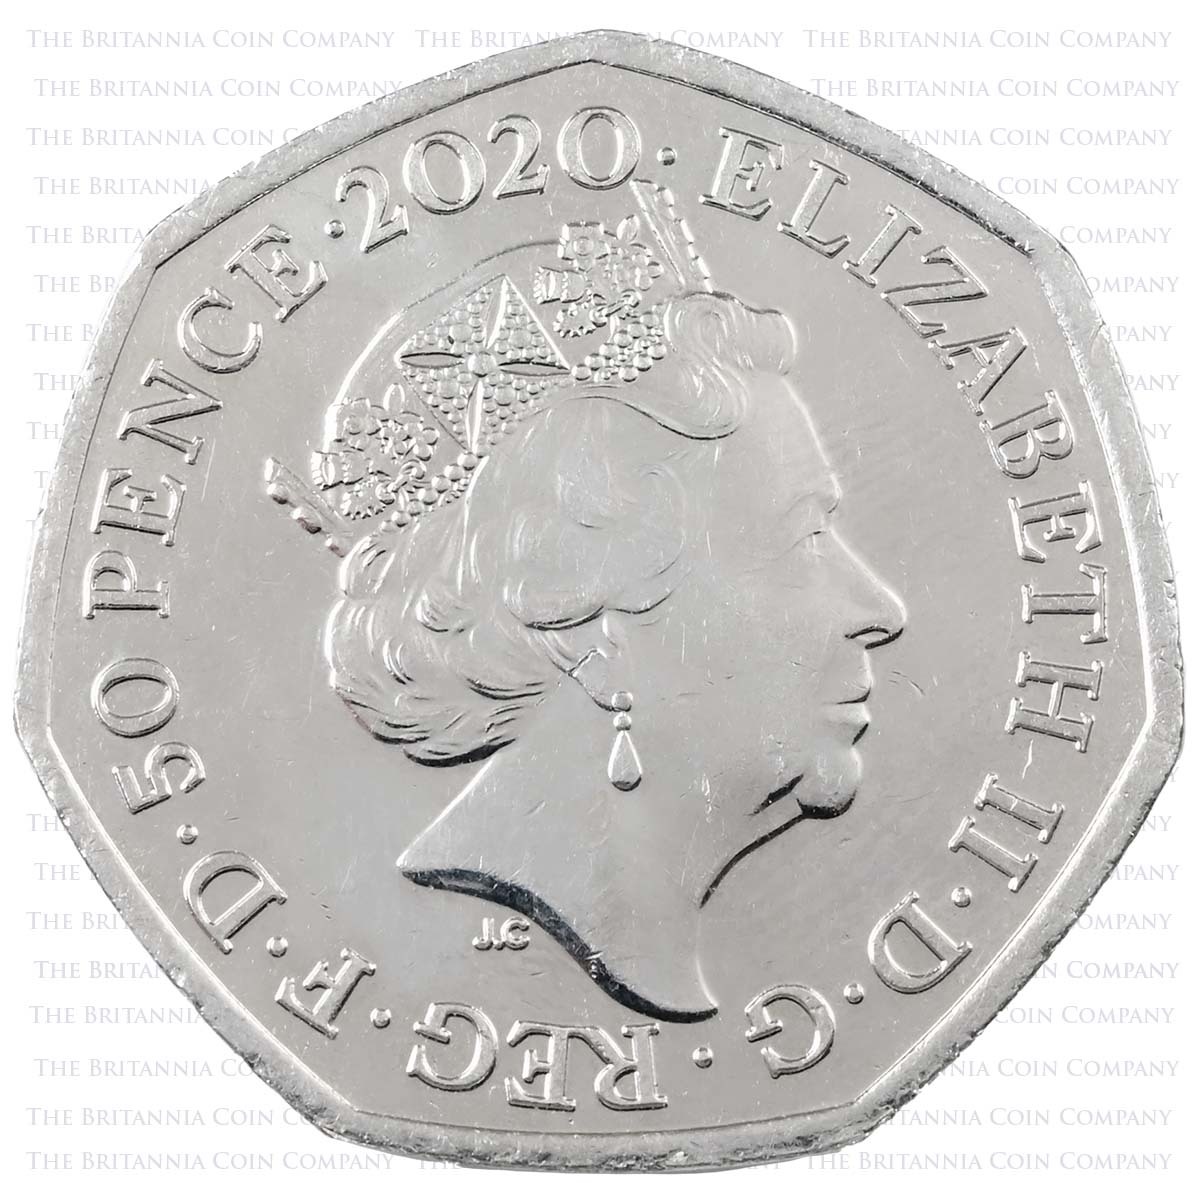 2020 Brexit EU European Union Withdrawal Peace Prosperity And Friendship Circulated Fifty Pence Coin Obverse